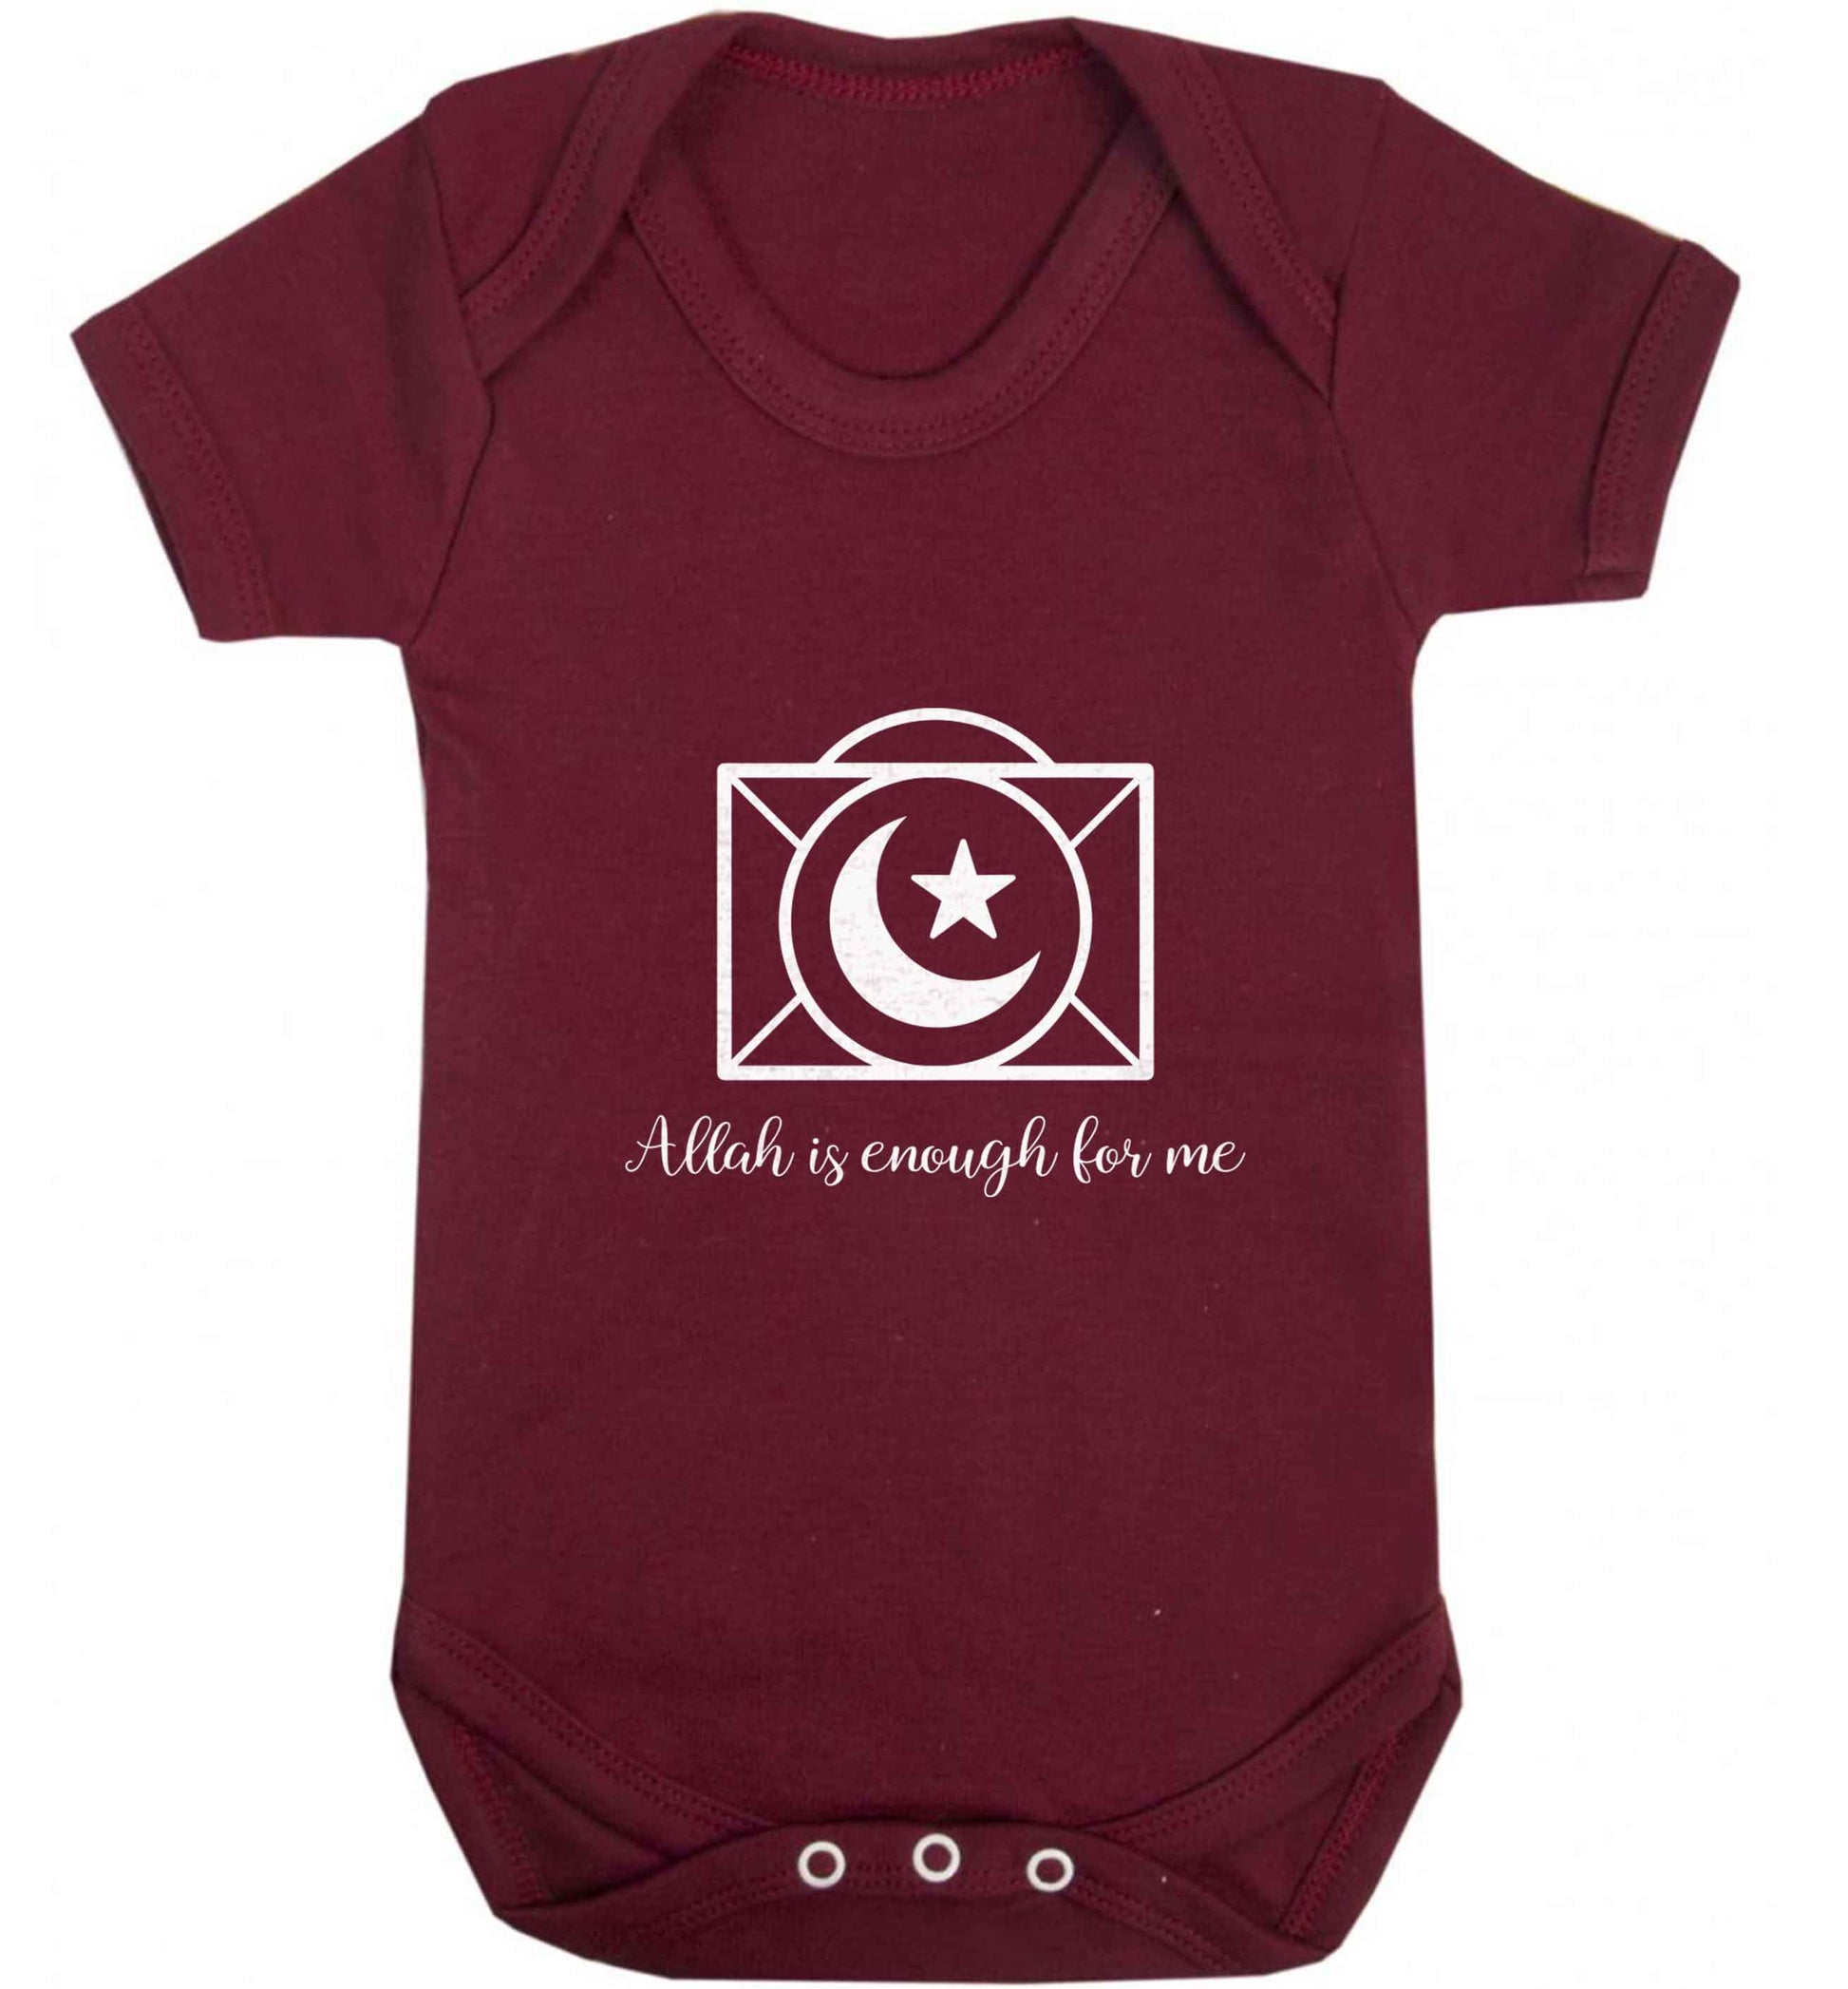 Allah is enough for me baby vest maroon 18-24 months